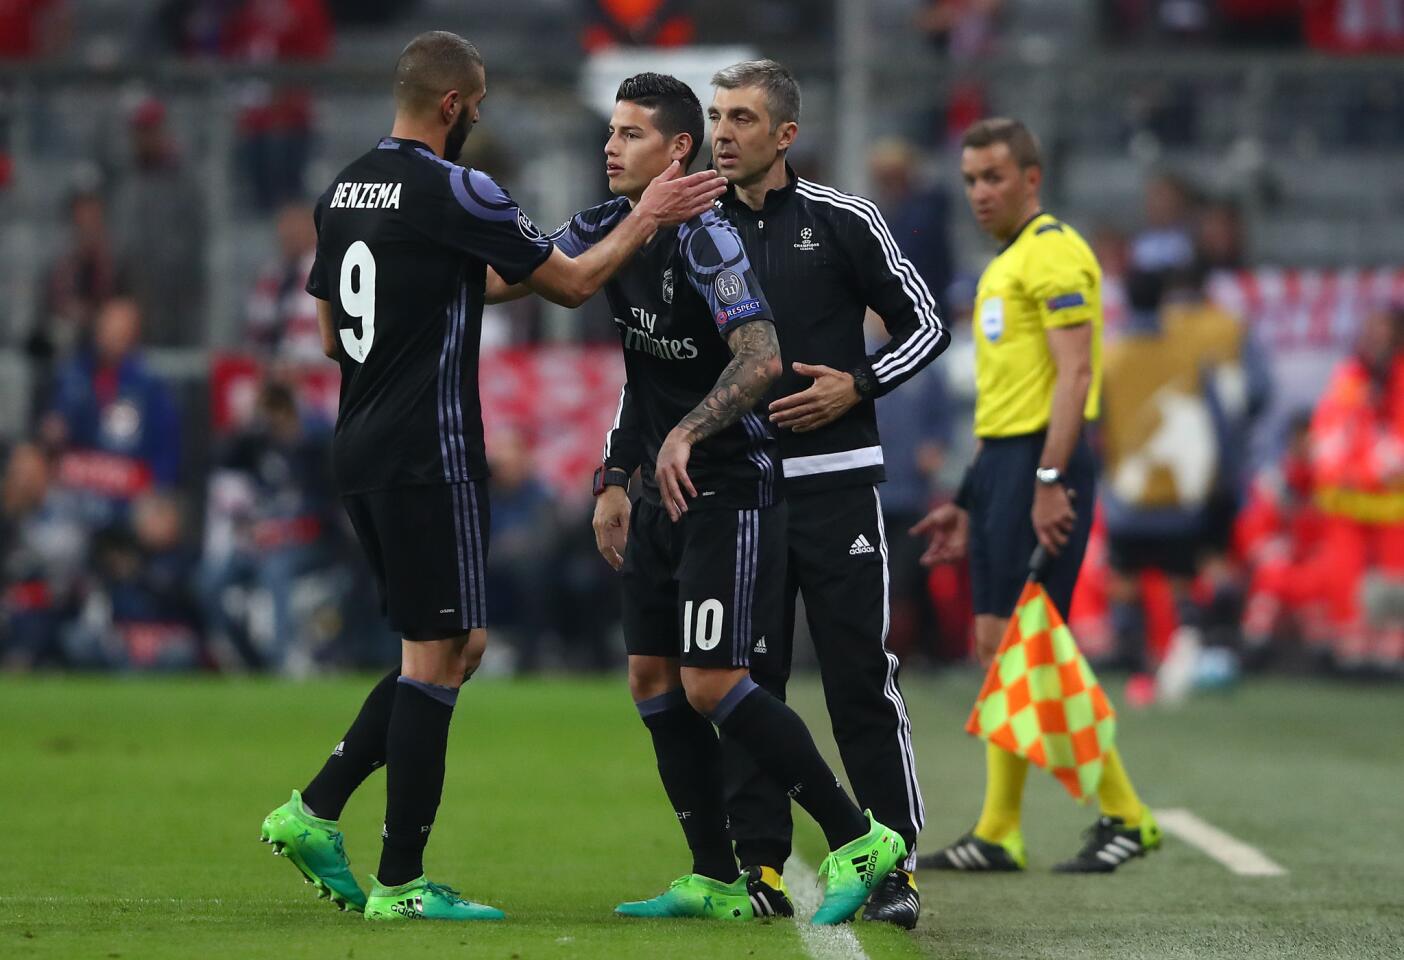 Real Madrid's James Rodriguez comes on as a substitute to replace Karim Benzema